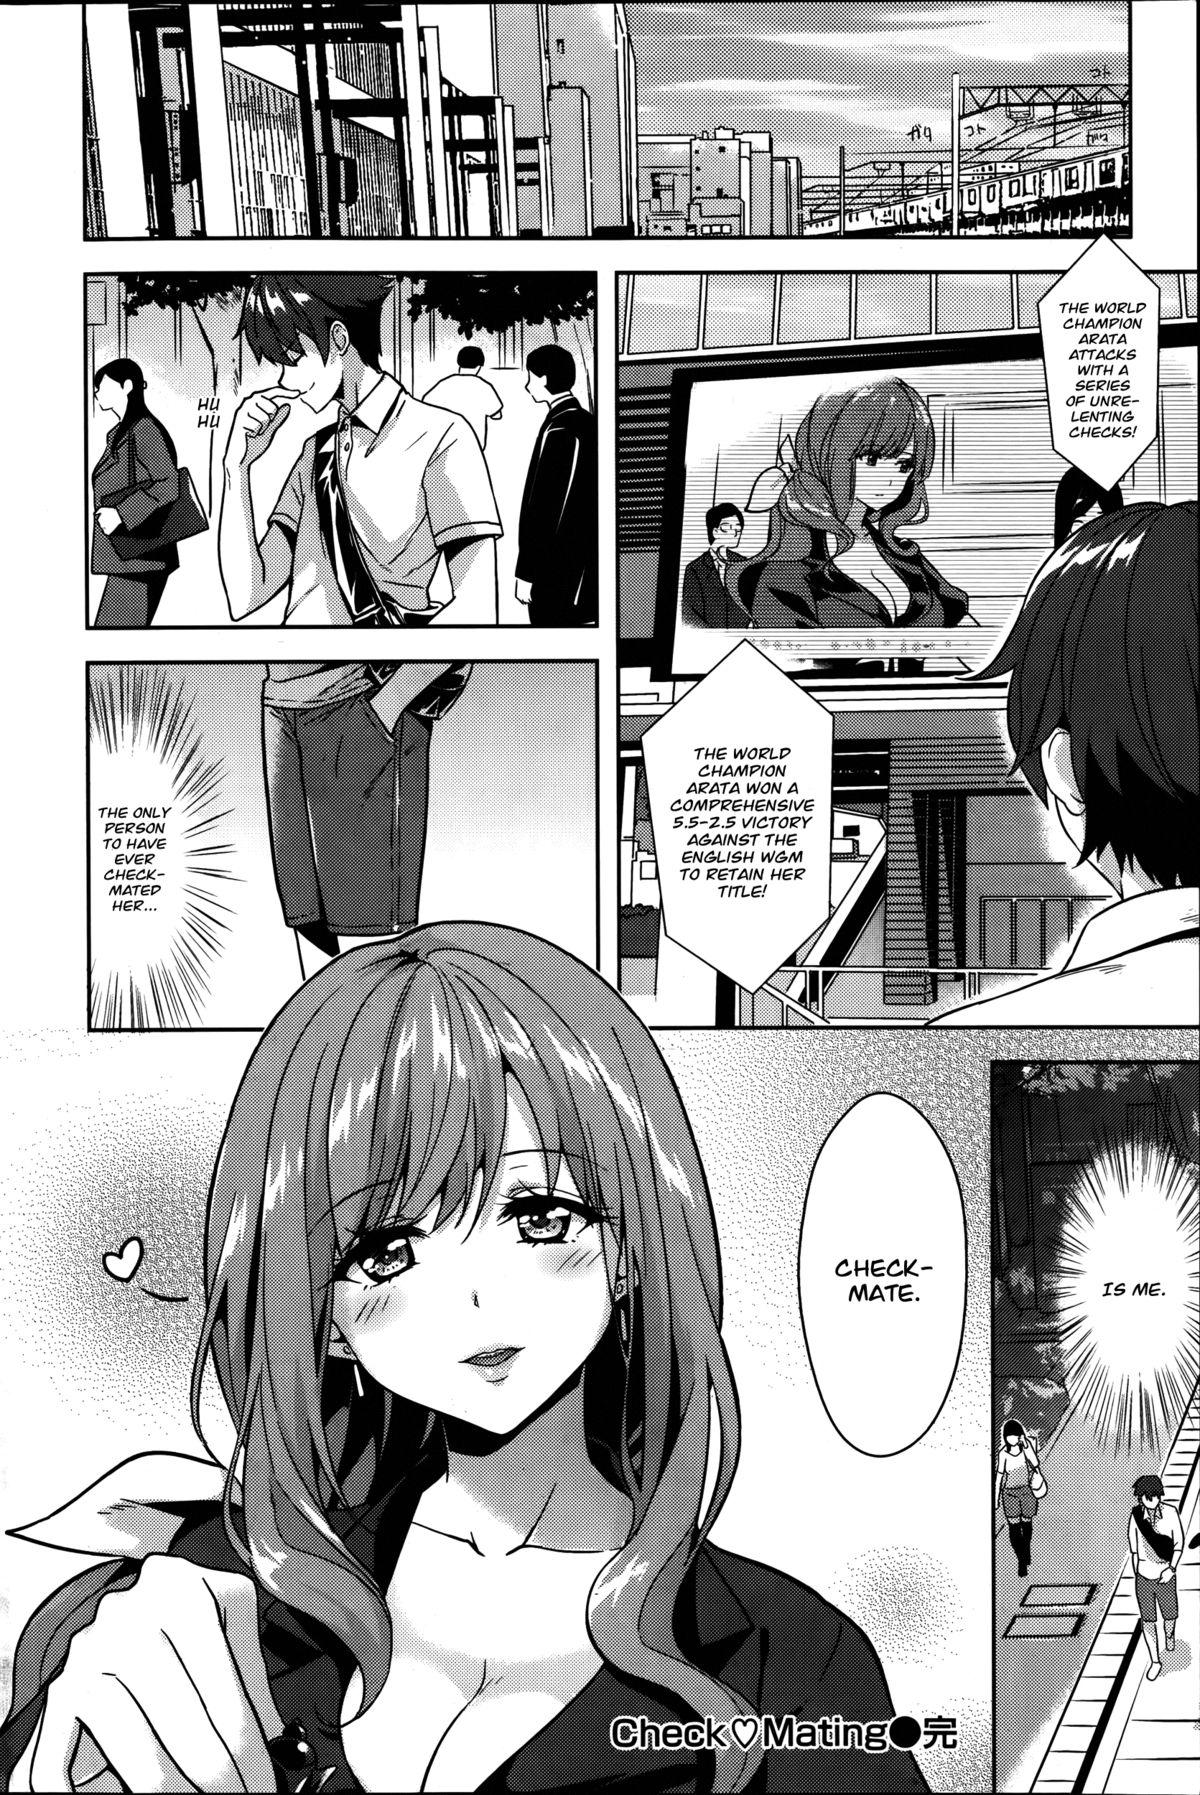 Bed Check ♥ Mating Throatfuck - Page 20